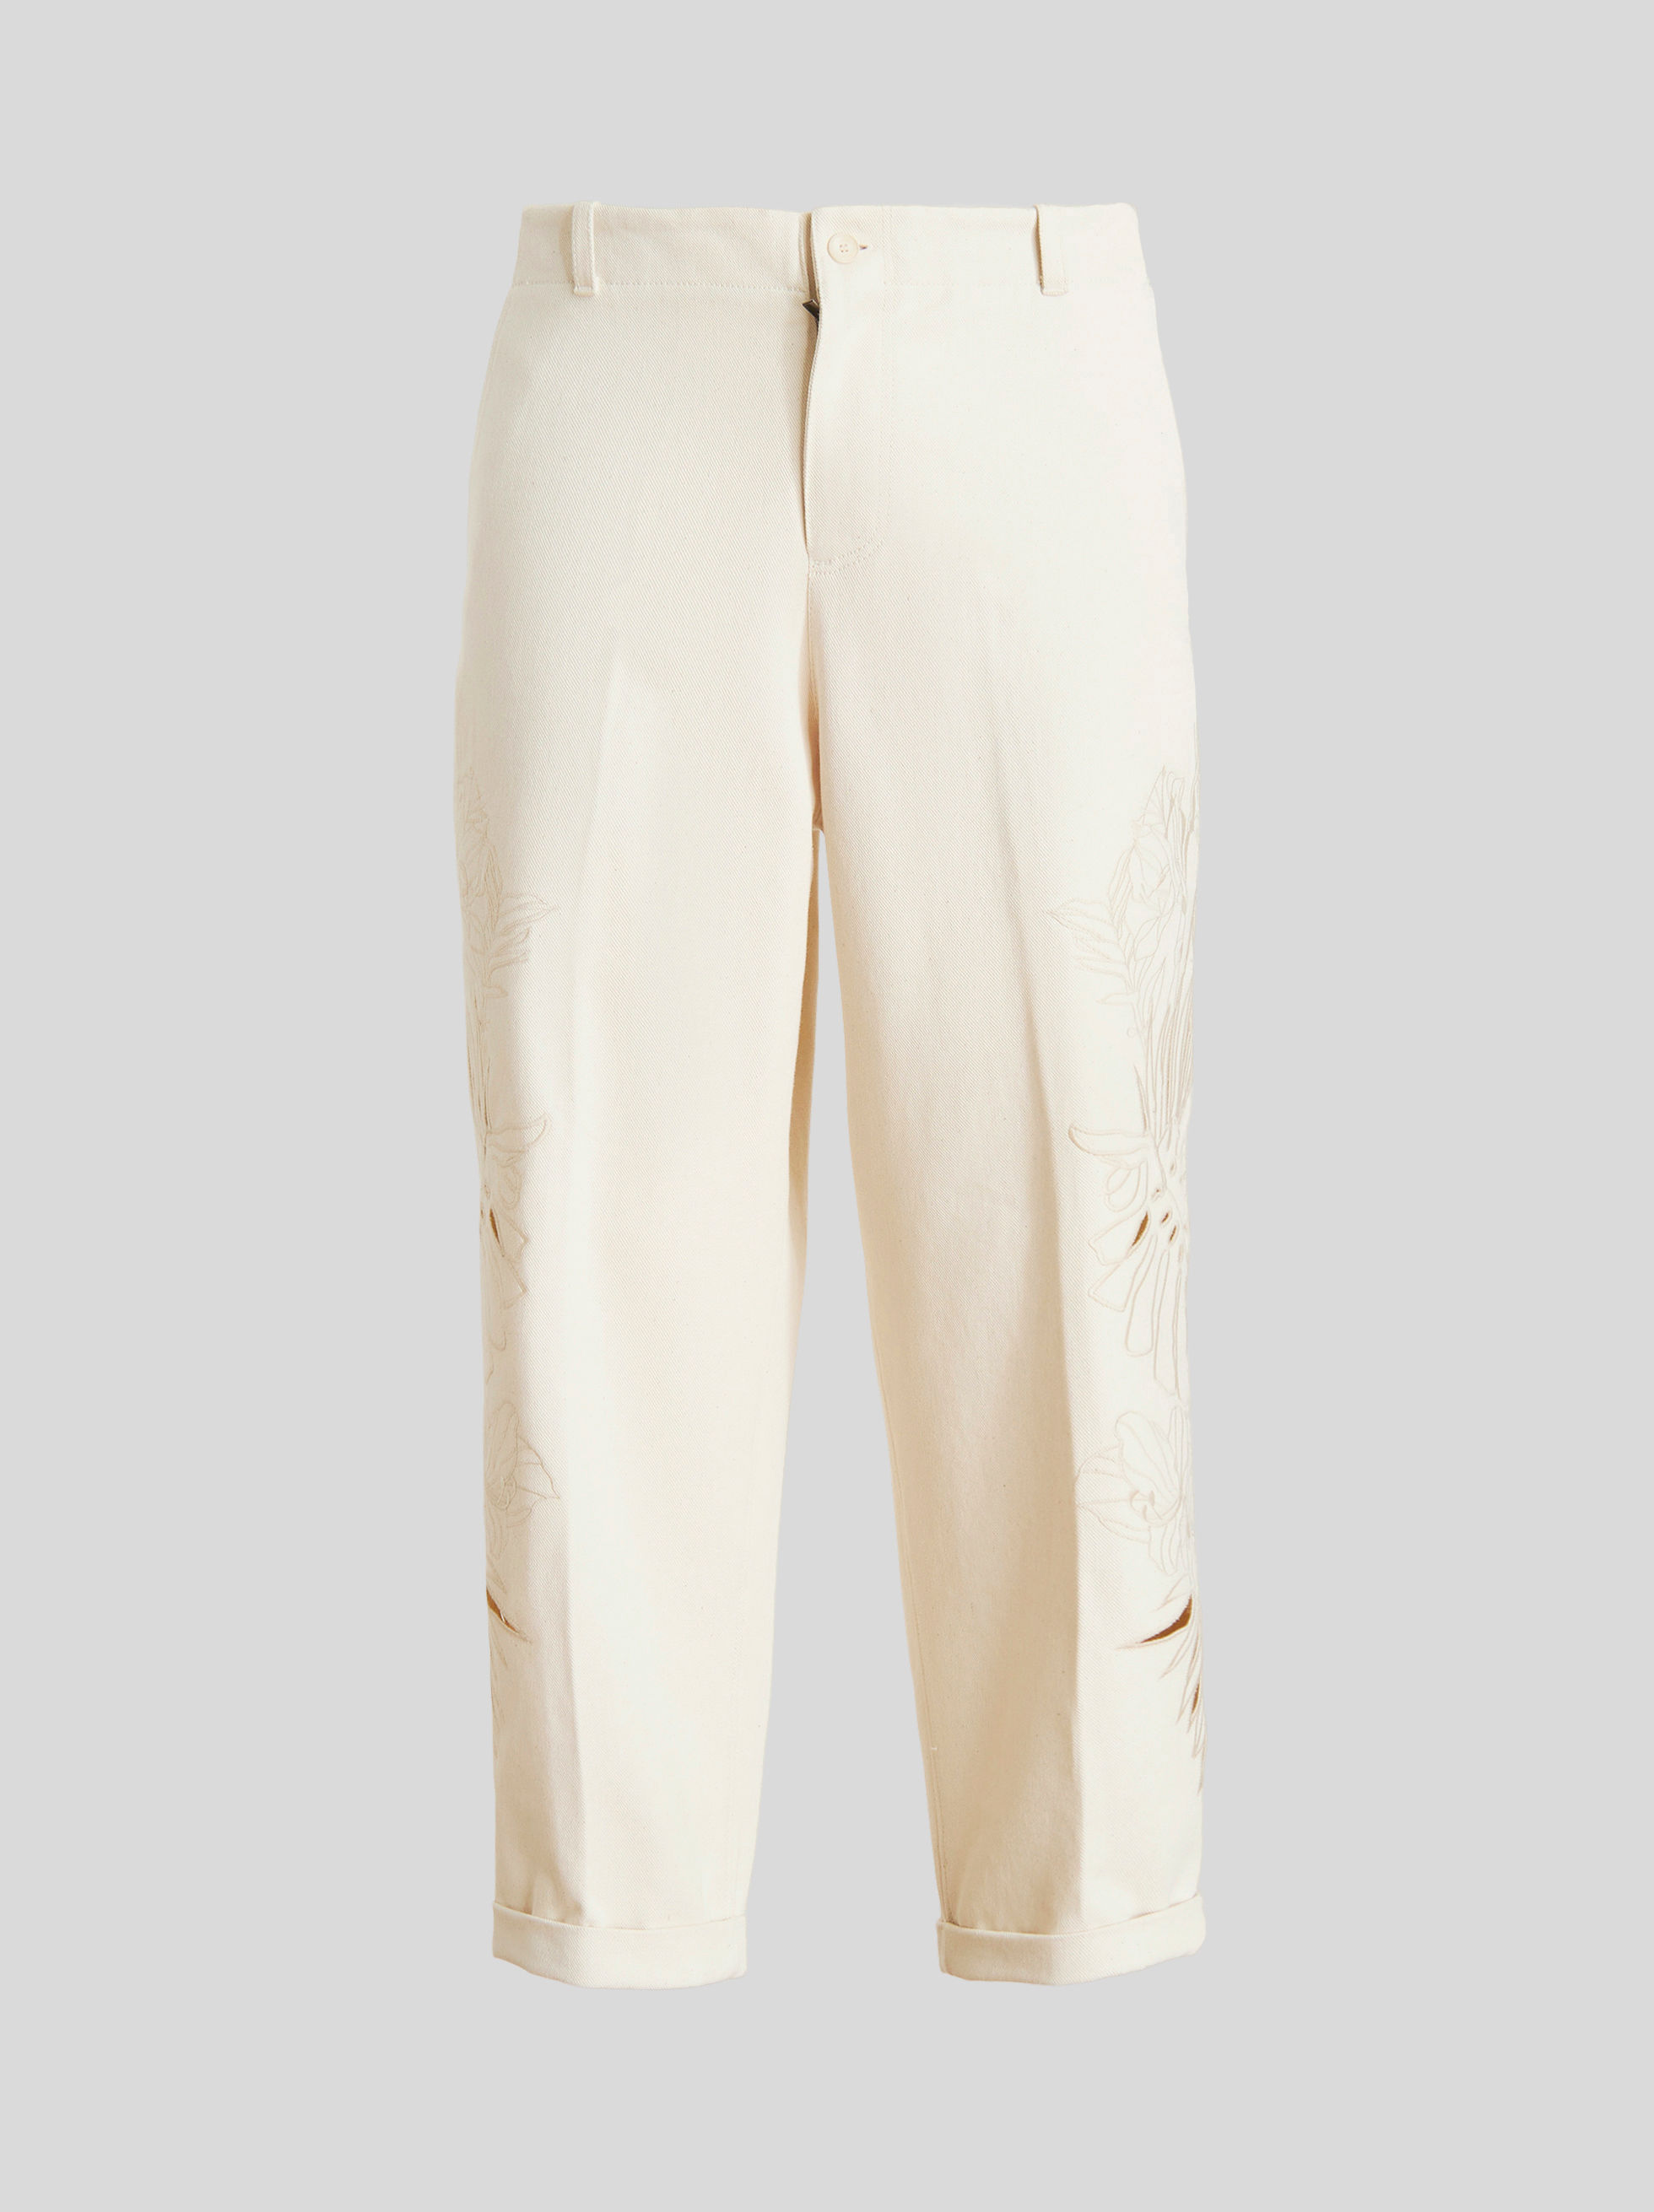 SAN GALLO AND FLORAL EMBROIDERY TROUSERS